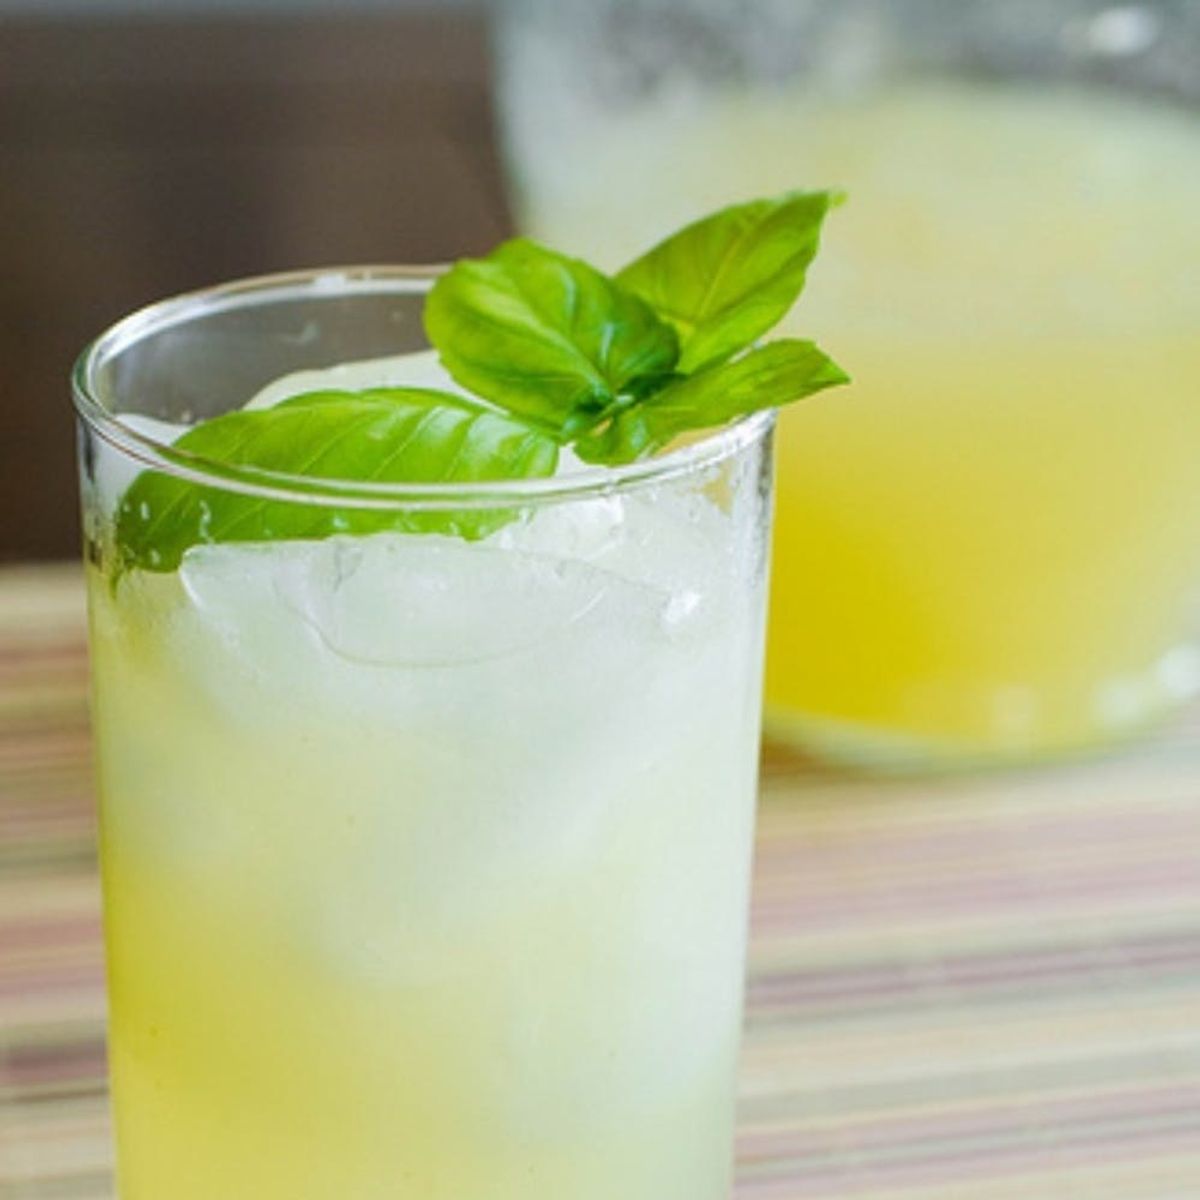 18 Refreshing Lemonade Recipes and Cocktails to Whip Up This Weekend